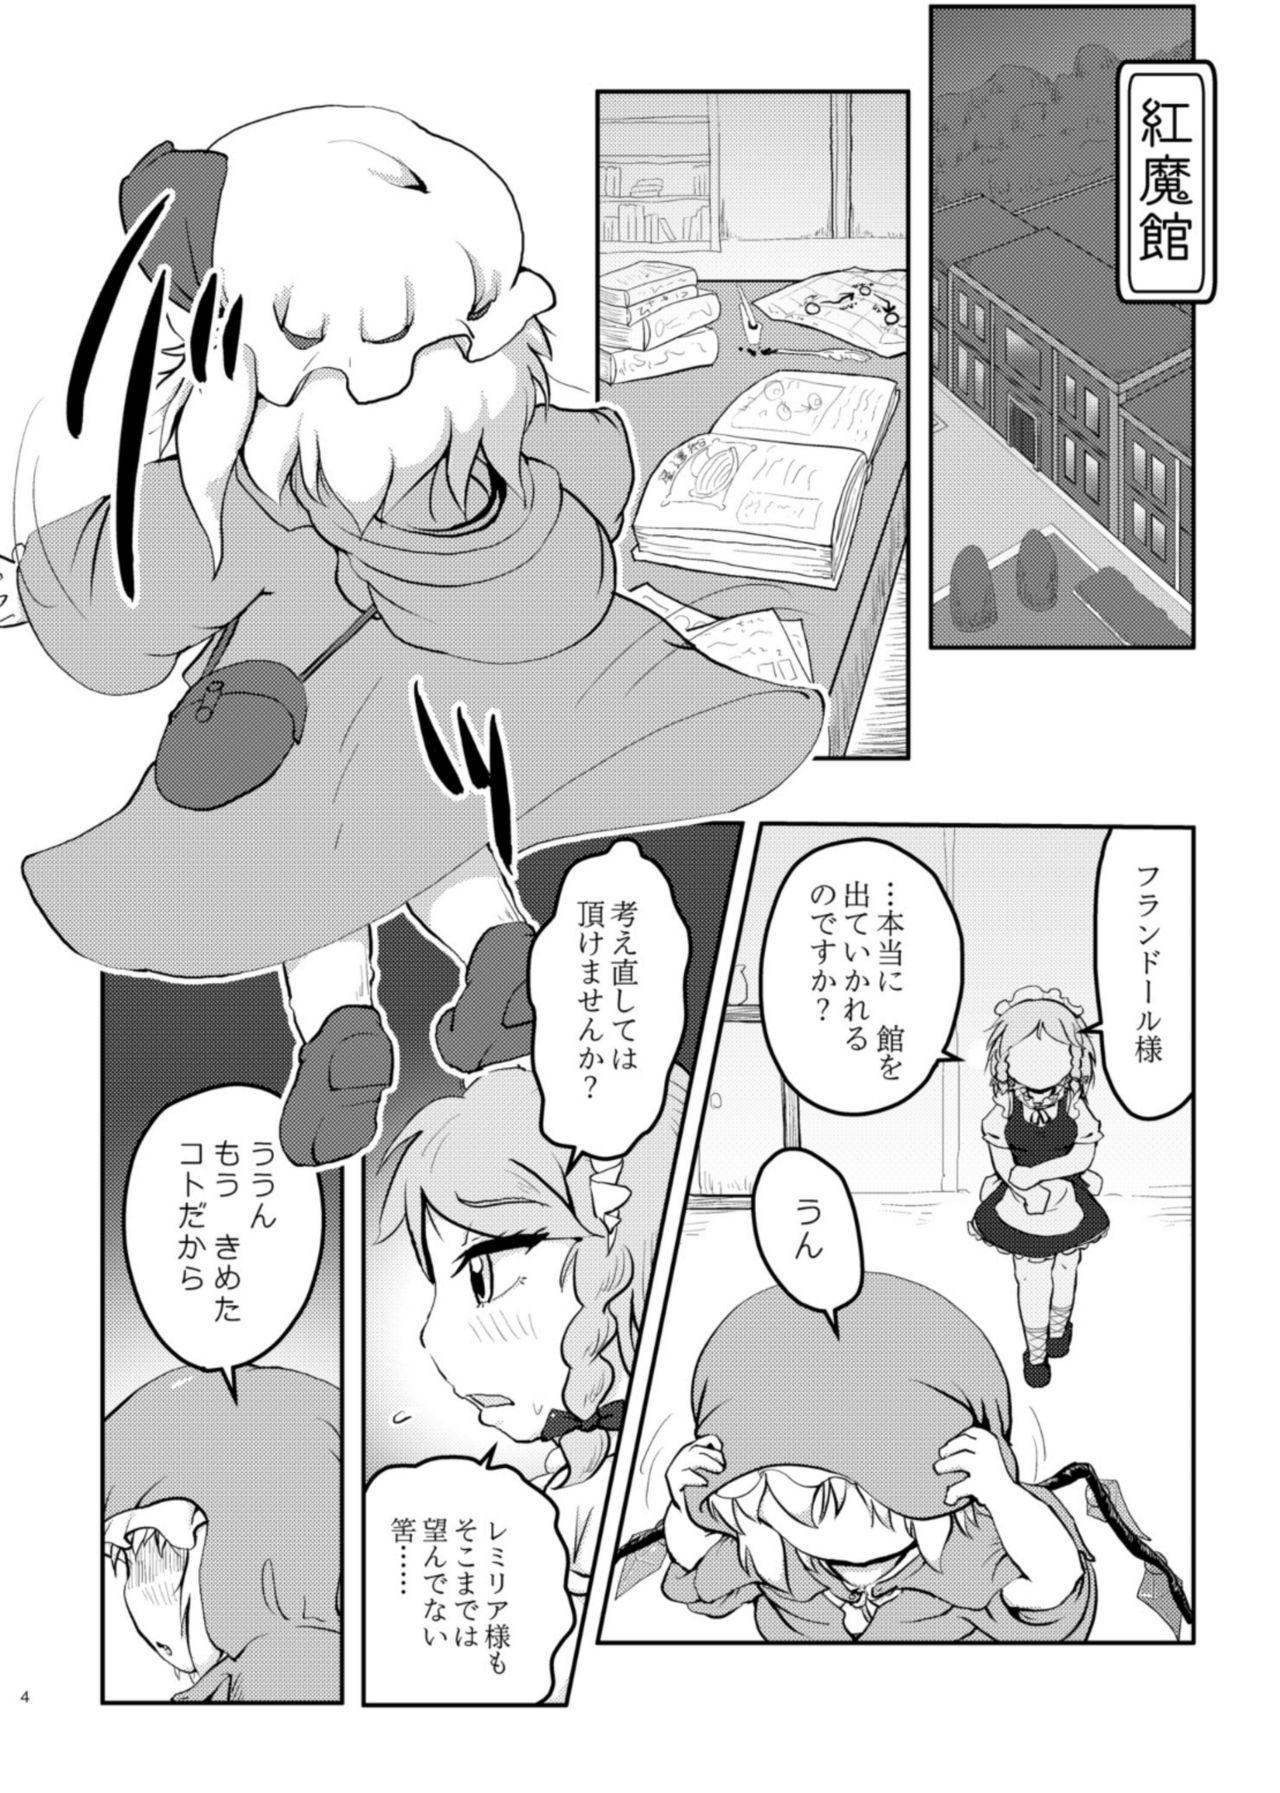 Ballbusting Scarlet Conflict 2 - Touhou project Verga - Page 4